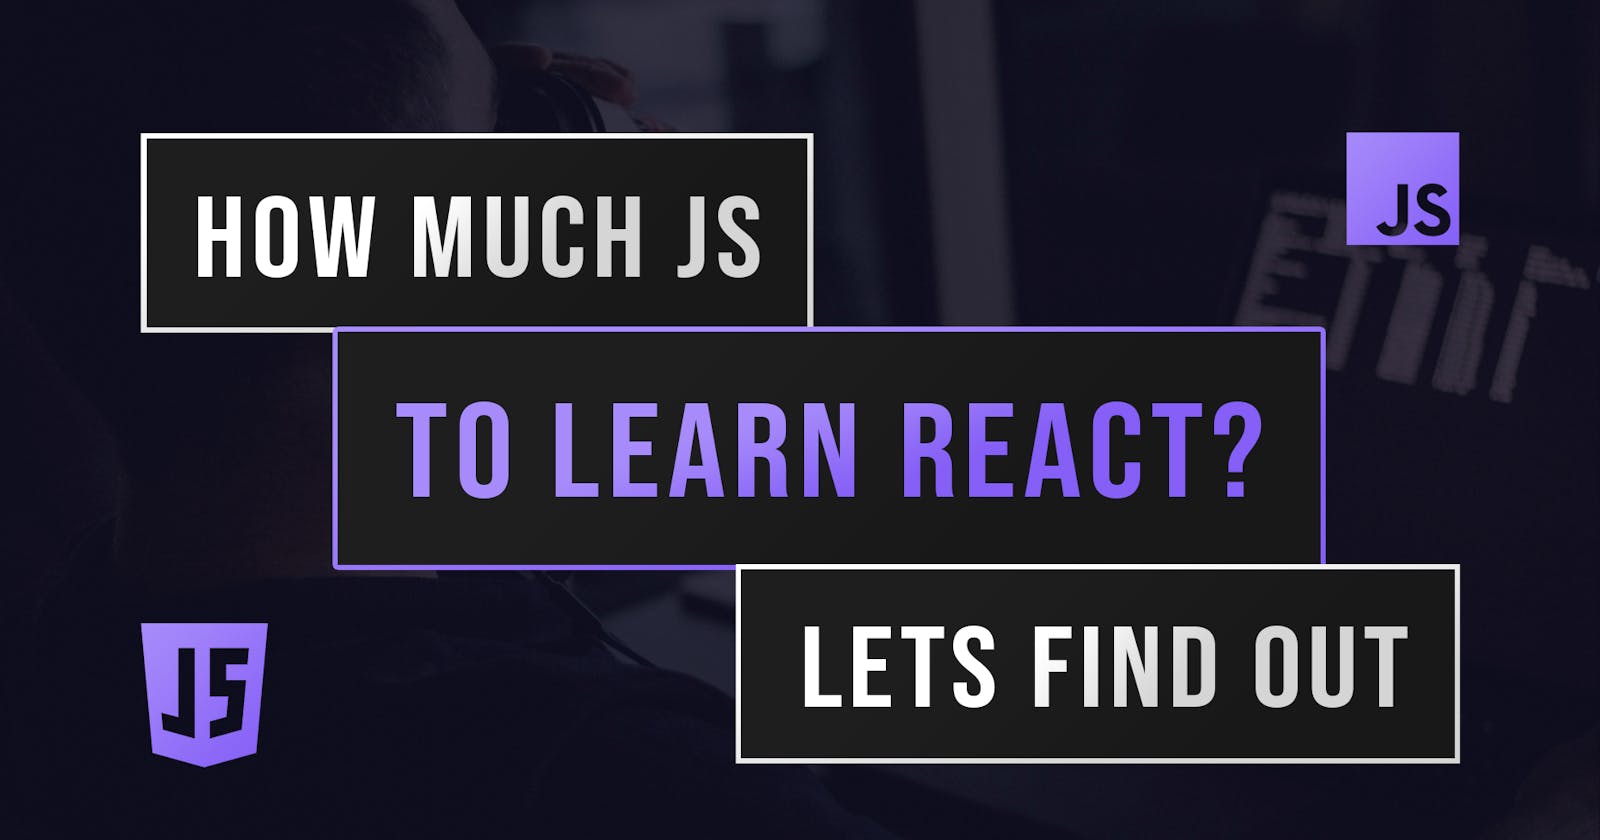 How Much JavaScript Is Needed To Learn React?